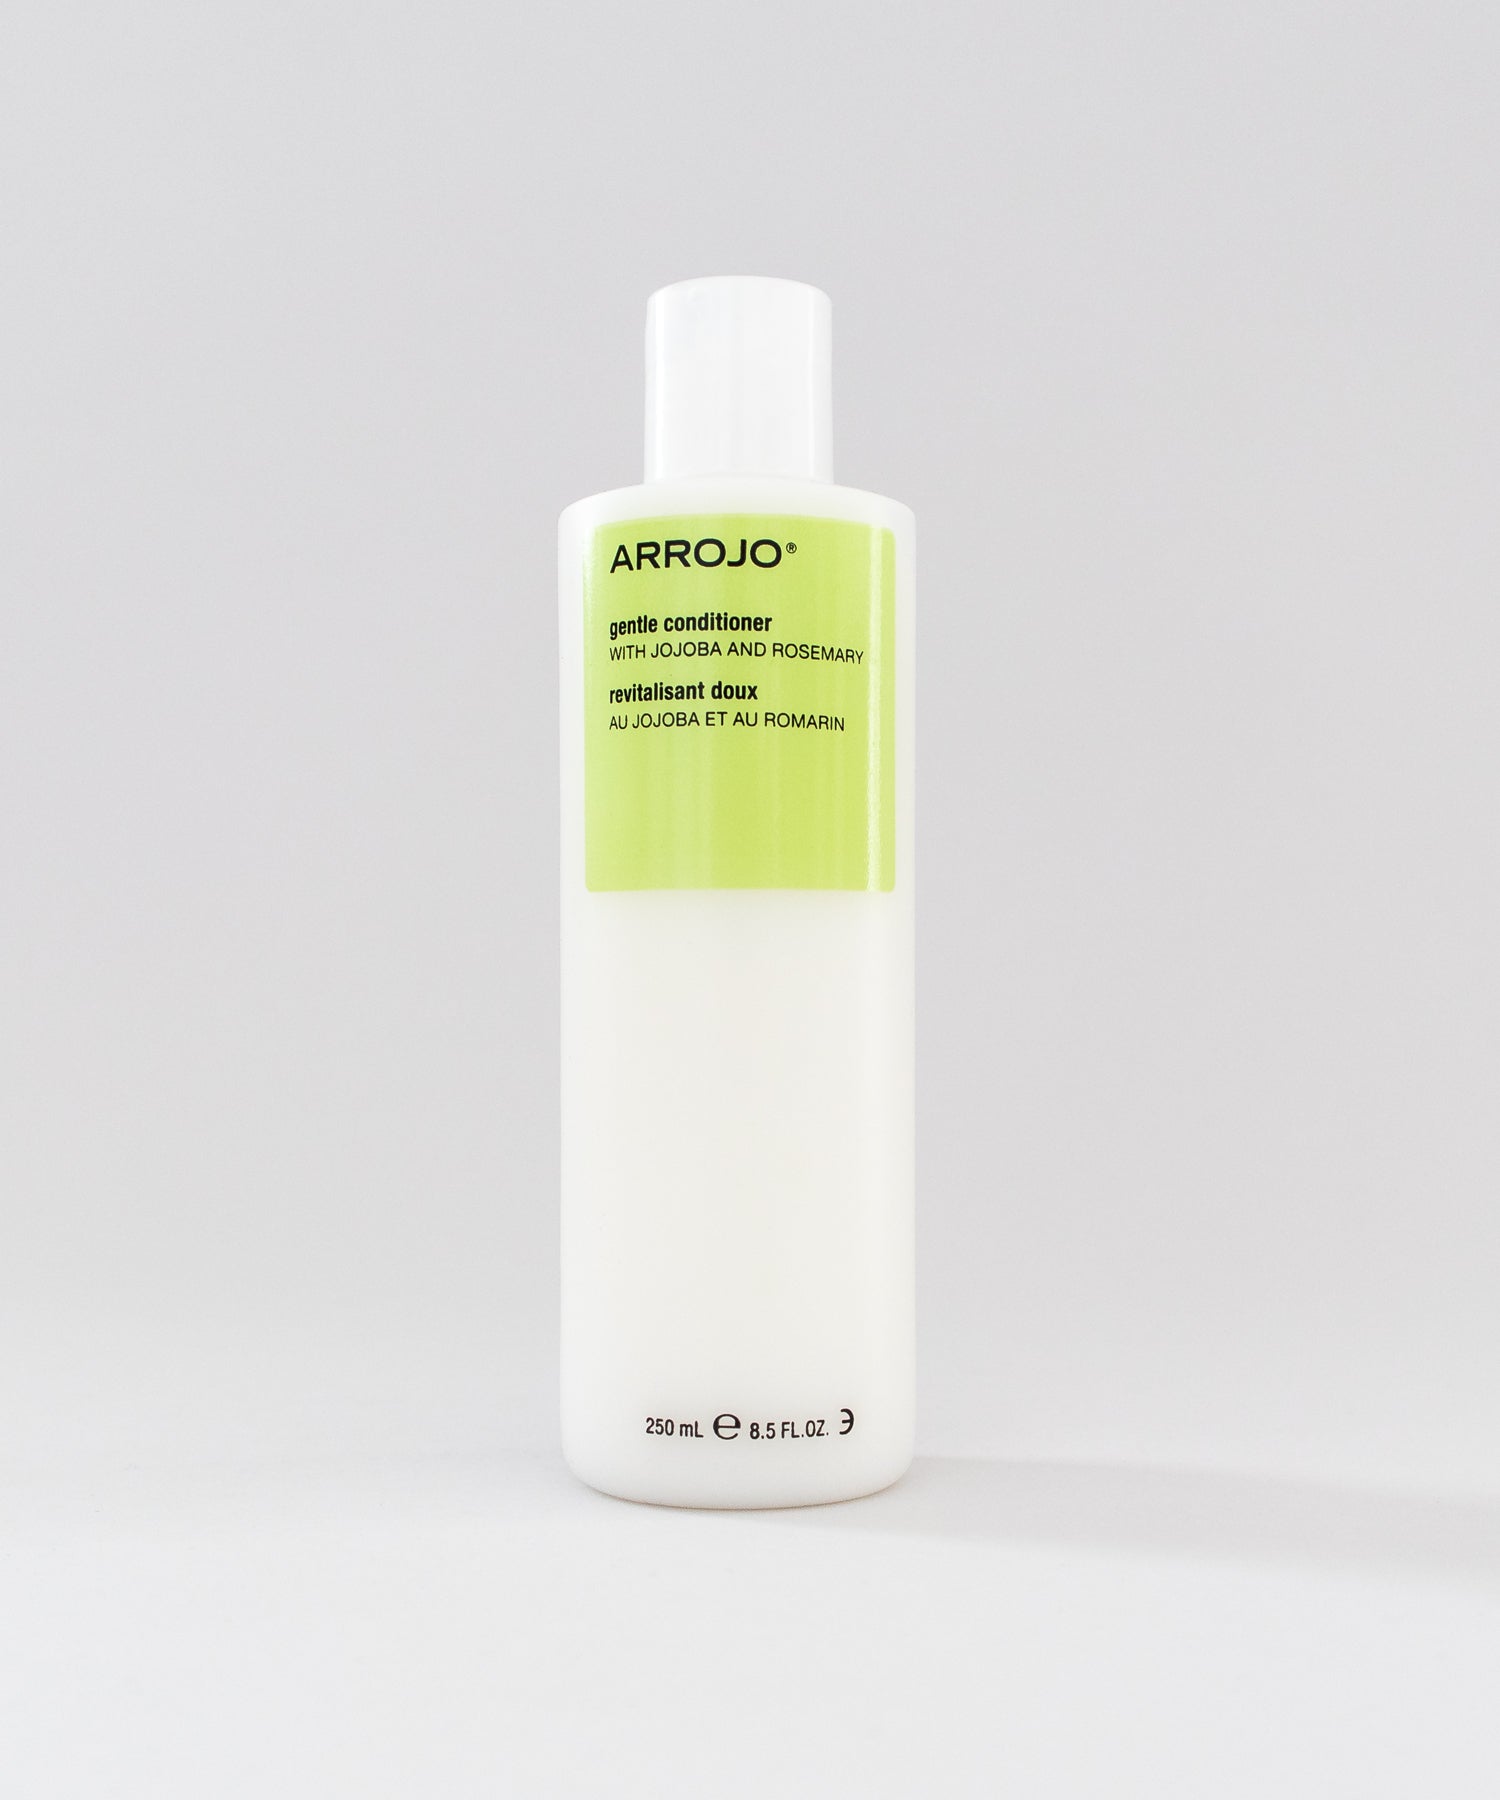 Our Arrojo Gentle Conditioner adds luster, shine, and moisture, with natural and organic ingredients - promoting a healthy scalp.